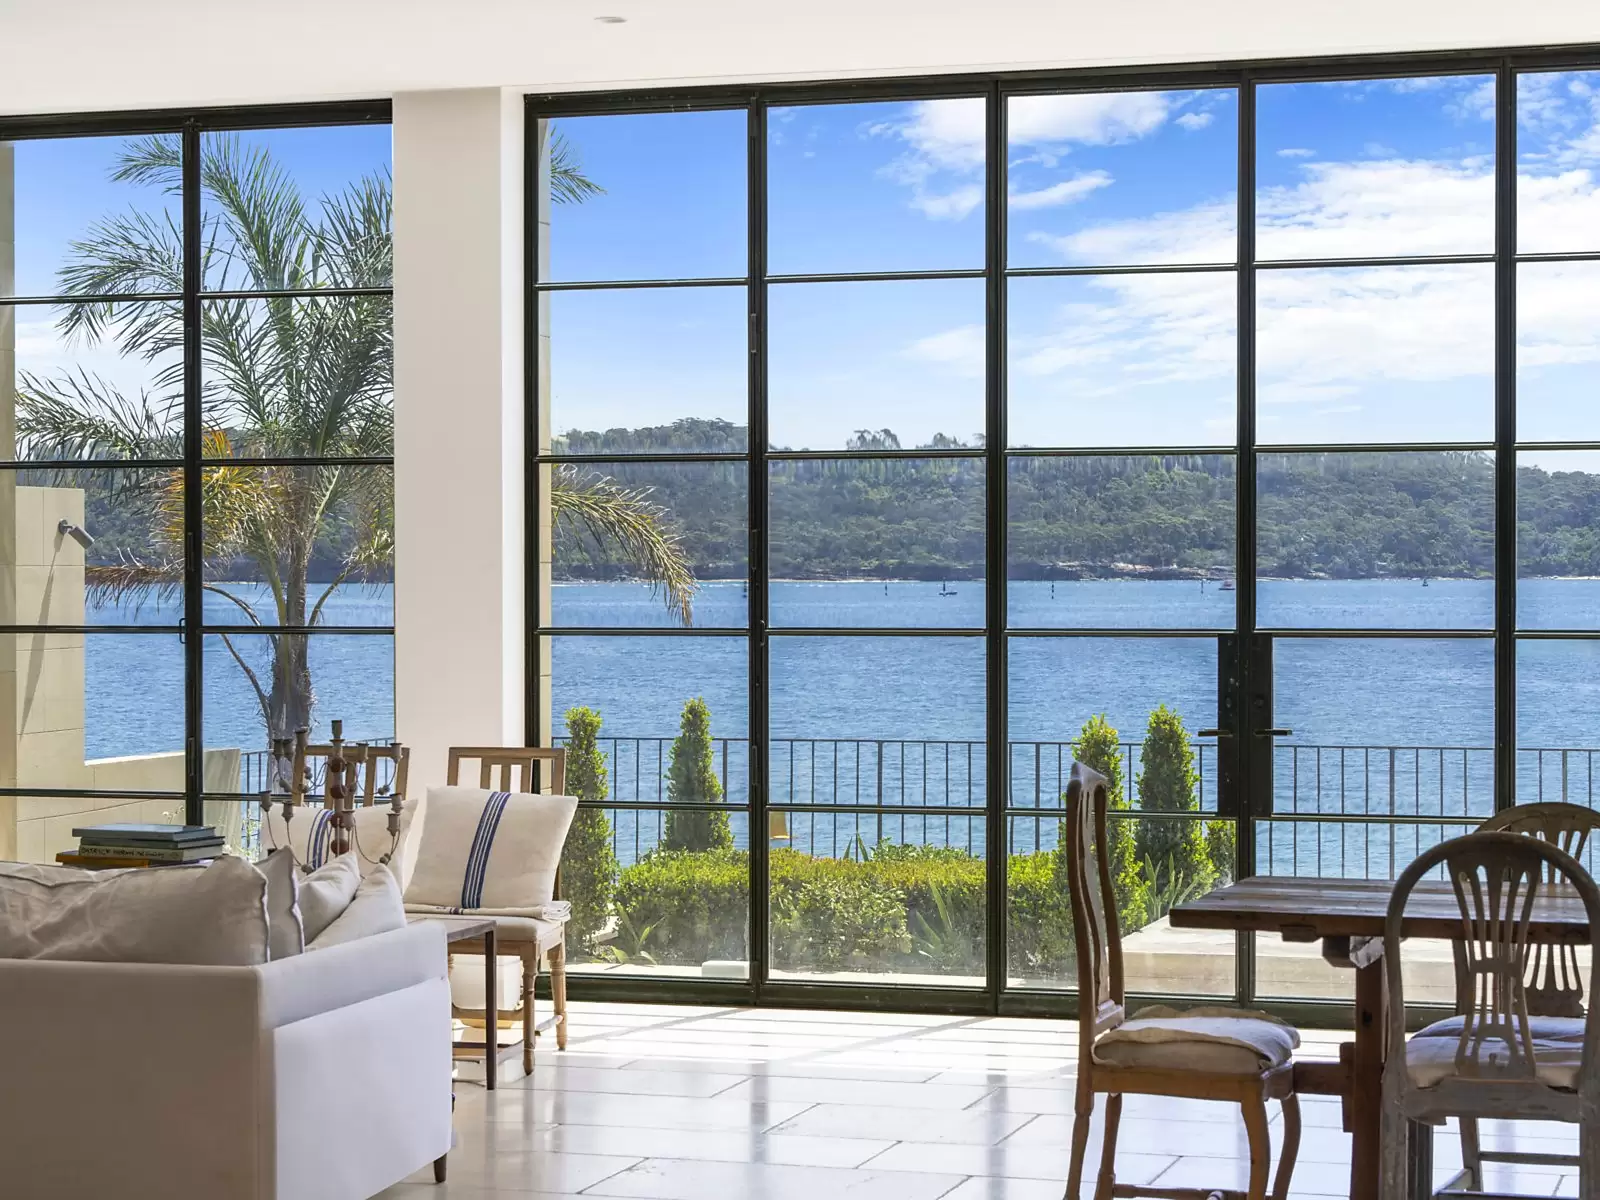 Photo #8: 13 Victoria Street, Watsons Bay - Sold by Sydney Sotheby's International Realty